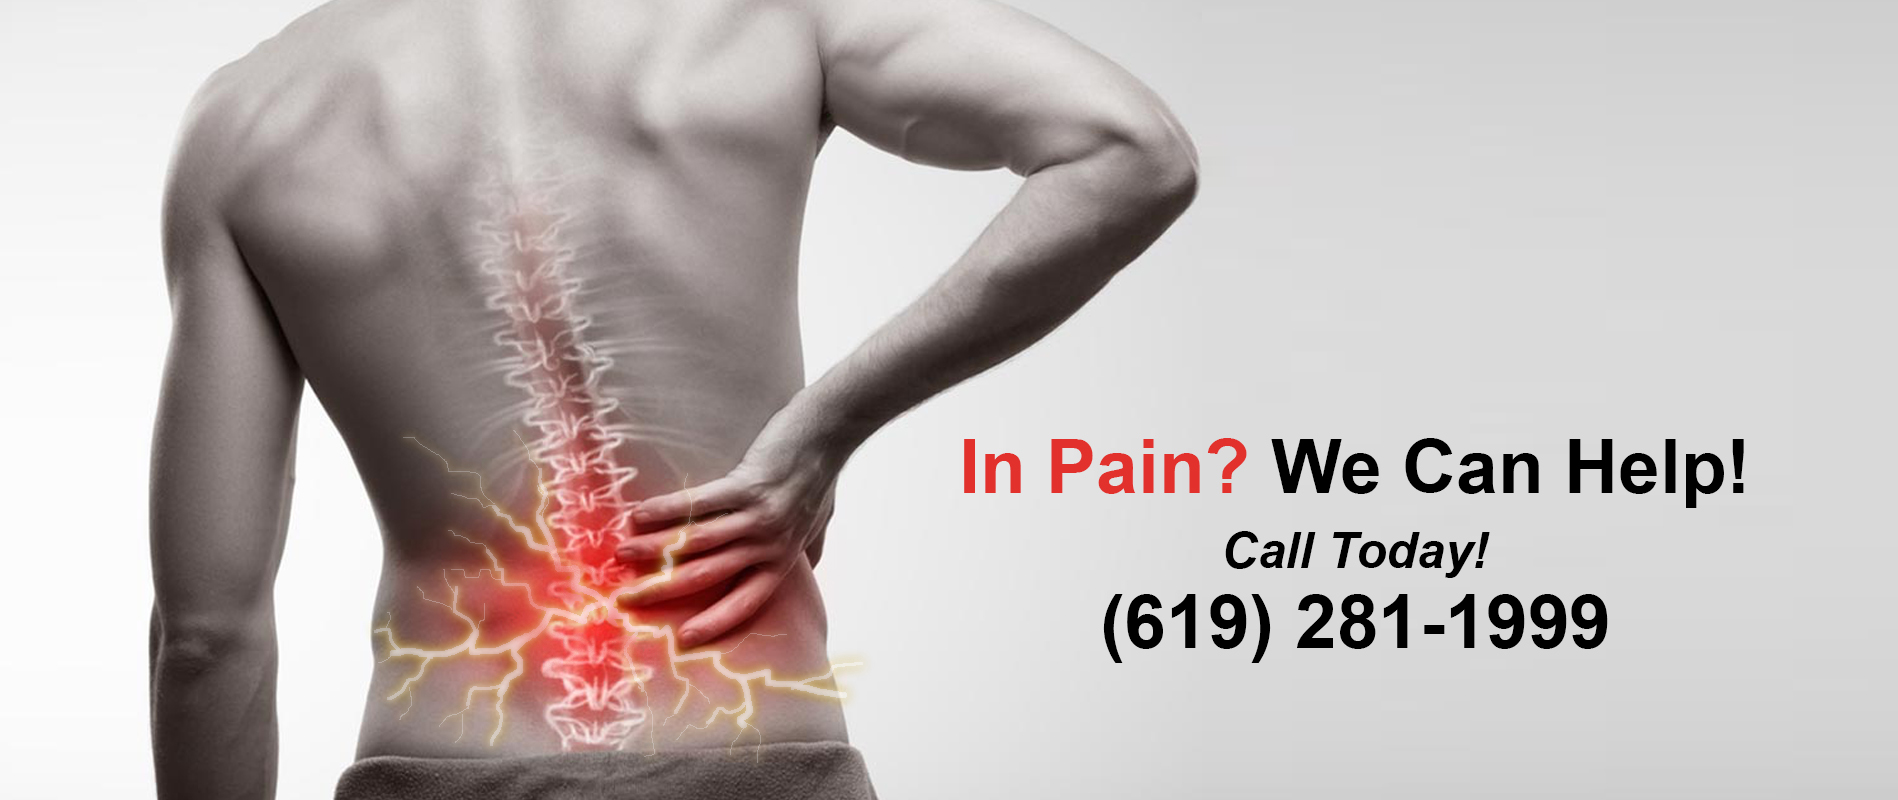 In Pain?We can help